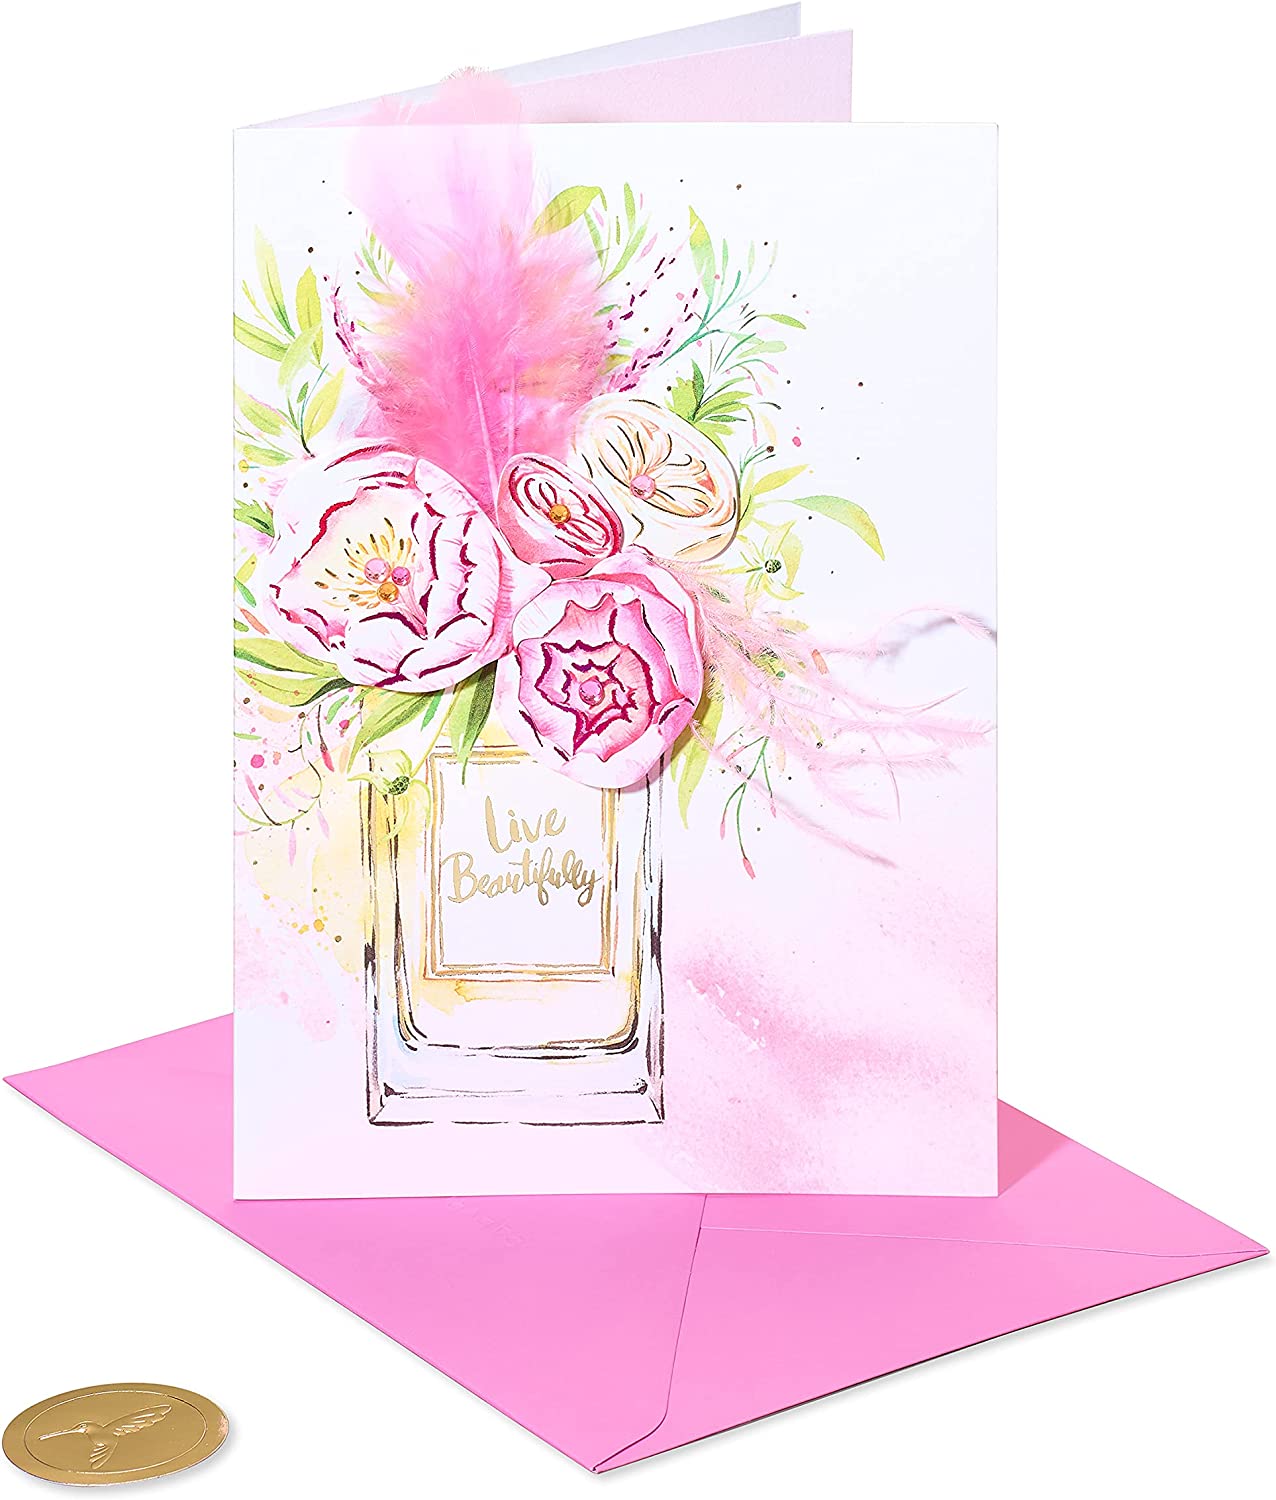 Papyrus Blank Card for Her- BCRF Partnership (Live Beautifully)